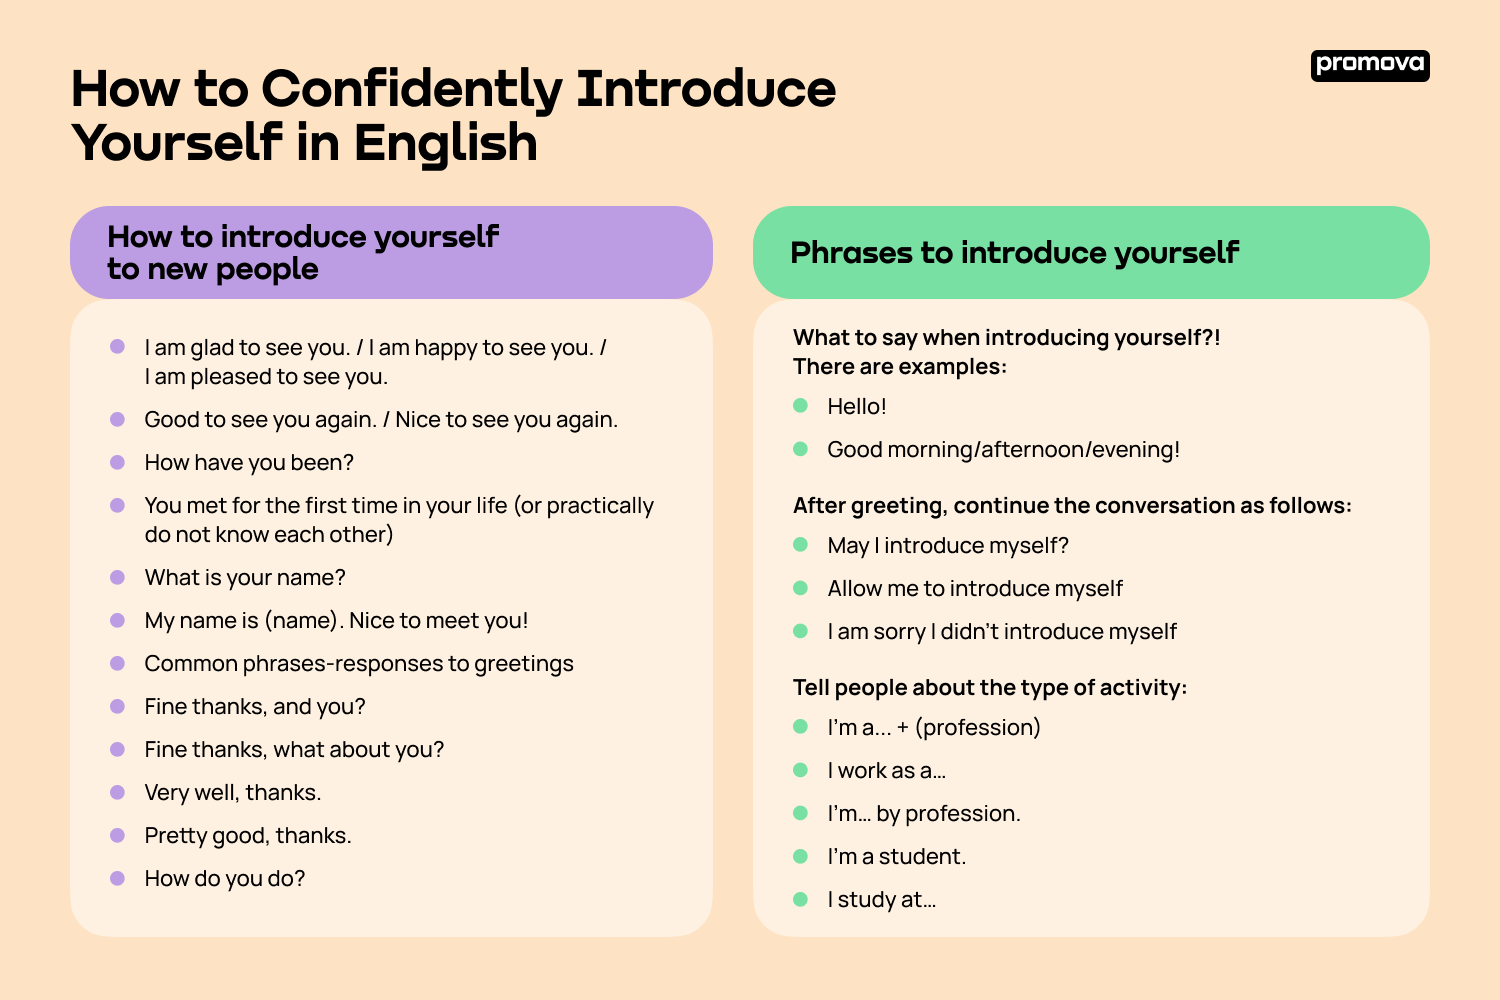 How to Introduce Yourself to New People in English